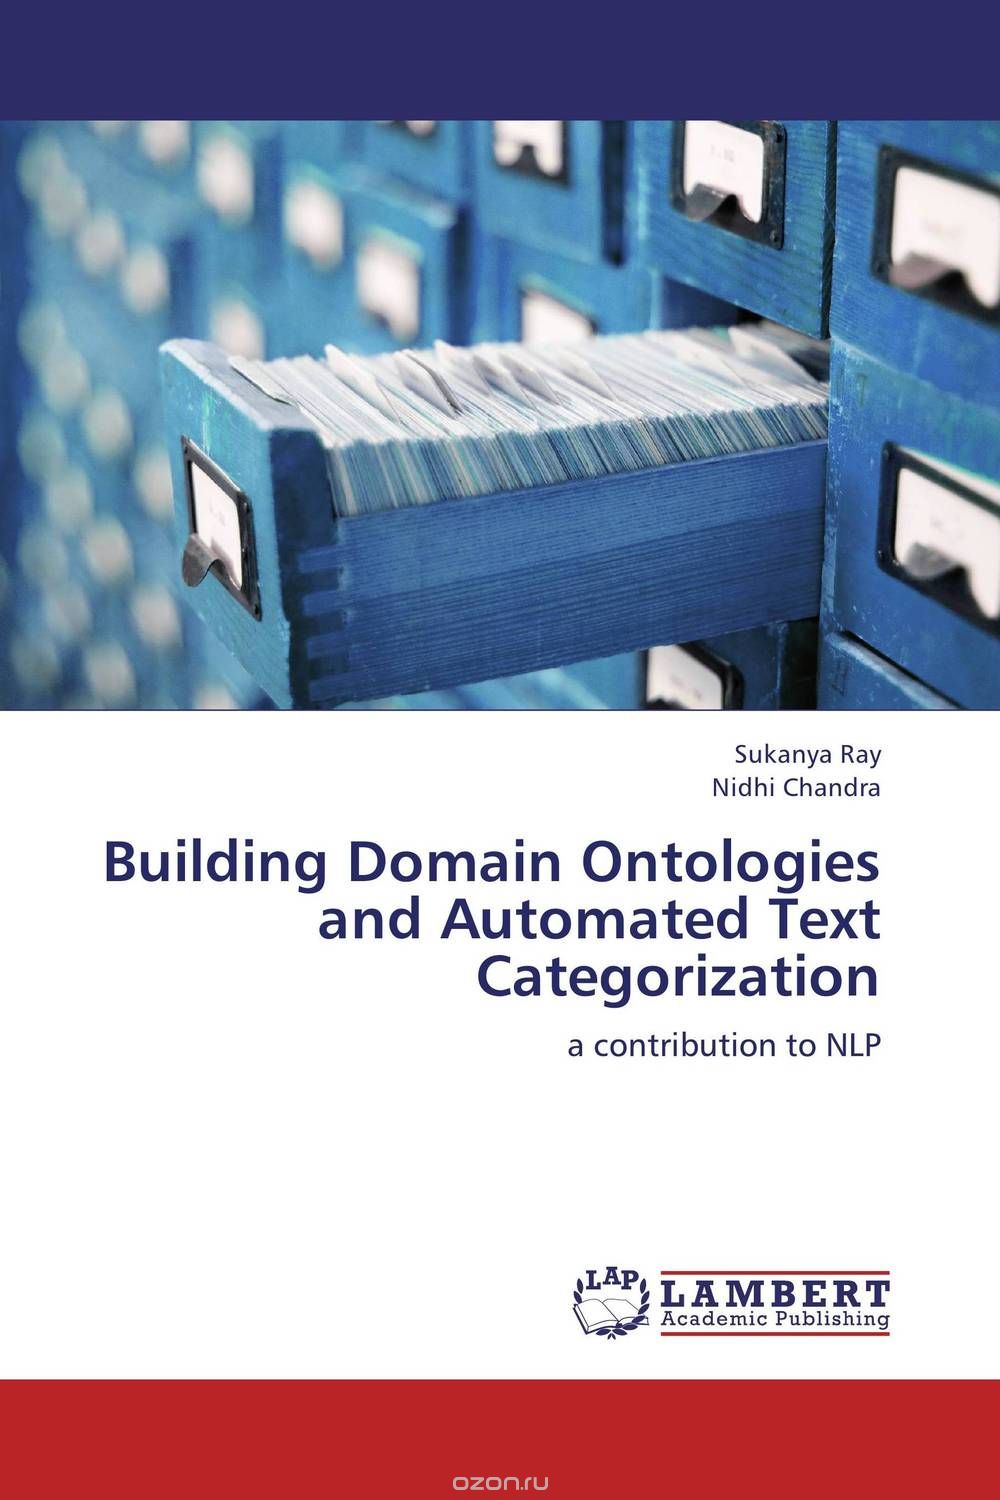 Building Domain Ontologies and Automated Text Categorization